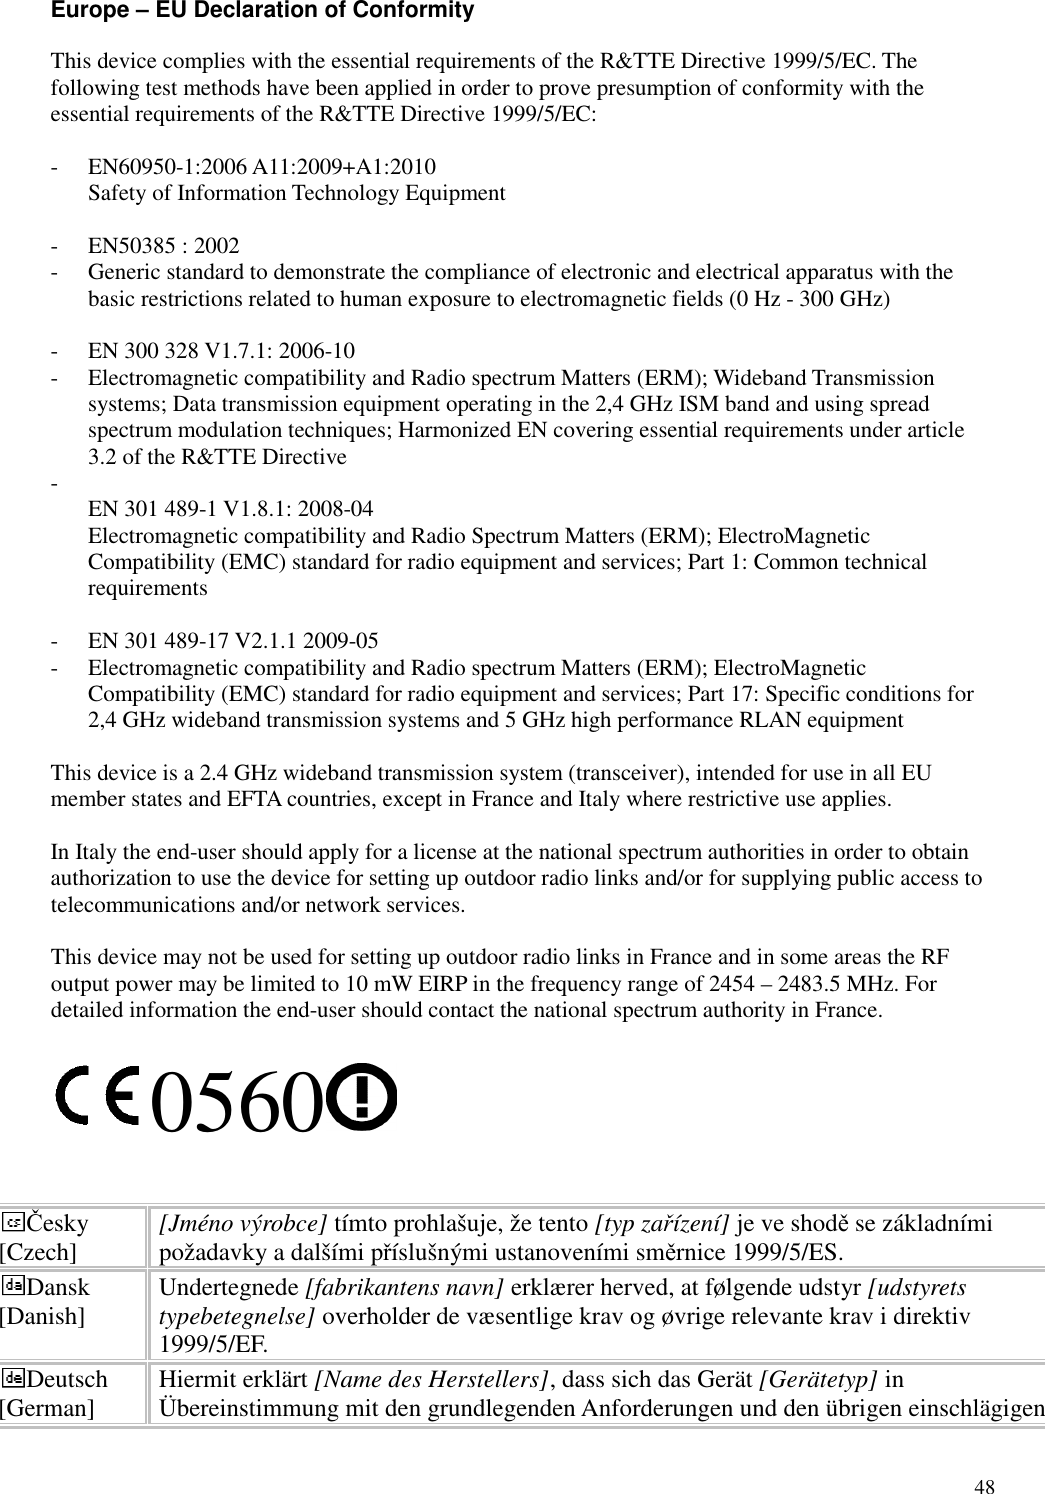   48 Europe – EU Declaration of Conformity This device complies with the essential requirements of the R&amp;TTE Directive 1999/5/EC. The following test methods have been applied in order to prove presumption of conformity with the essential requirements of the R&amp;TTE Directive 1999/5/EC:  - EN60950-1:2006 A11:2009+A1:2010 Safety of Information Technology Equipment  - EN50385 : 2002 - Generic standard to demonstrate the compliance of electronic and electrical apparatus with the basic restrictions related to human exposure to electromagnetic fields (0 Hz - 300 GHz)  - EN 300 328 V1.7.1: 2006-10 - Electromagnetic compatibility and Radio spectrum Matters (ERM); Wideband Transmission systems; Data transmission equipment operating in the 2,4 GHz ISM band and using spread spectrum modulation techniques; Harmonized EN covering essential requirements under article 3.2 of the R&amp;TTE Directive -  EN 301 489-1 V1.8.1: 2008-04 Electromagnetic compatibility and Radio Spectrum Matters (ERM); ElectroMagnetic Compatibility (EMC) standard for radio equipment and services; Part 1: Common technical requirements  - EN 301 489-17 V2.1.1 2009-05   - Electromagnetic compatibility and Radio spectrum Matters (ERM); ElectroMagnetic Compatibility (EMC) standard for radio equipment and services; Part 17: Specific conditions for 2,4 GHz wideband transmission systems and 5 GHz high performance RLAN equipment  This device is a 2.4 GHz wideband transmission system (transceiver), intended for use in all EU member states and EFTA countries, except in France and Italy where restrictive use applies.  In Italy the end-user should apply for a license at the national spectrum authorities in order to obtain authorization to use the device for setting up outdoor radio links and/or for supplying public access to telecommunications and/or network services.  This device may not be used for setting up outdoor radio links in France and in some areas the RF output power may be limited to 10 mW EIRP in the frequency range of 2454 – 2483.5 MHz. For detailed information the end-user should contact the national spectrum authority in France.  0560   Česky [Czech]  [Jméno výrobce] tímto prohlašuje, že tento [typ zařízení] je ve shodě se základními požadavky a dalšími příslušnými ustanoveními směrnice 1999/5/ES. Dansk [Danish]  Undertegnede [fabrikantens navn] erklærer herved, at følgende udstyr [udstyrets typebetegnelse] overholder de væsentlige krav og øvrige relevante krav i direktiv 1999/5/EF. Deutsch [German]  Hiermit erklärt [Name des Herstellers], dass sich das Gerät [Gerätetyp] in Übereinstimmung mit den grundlegenden Anforderungen und den übrigen einschlägigen 